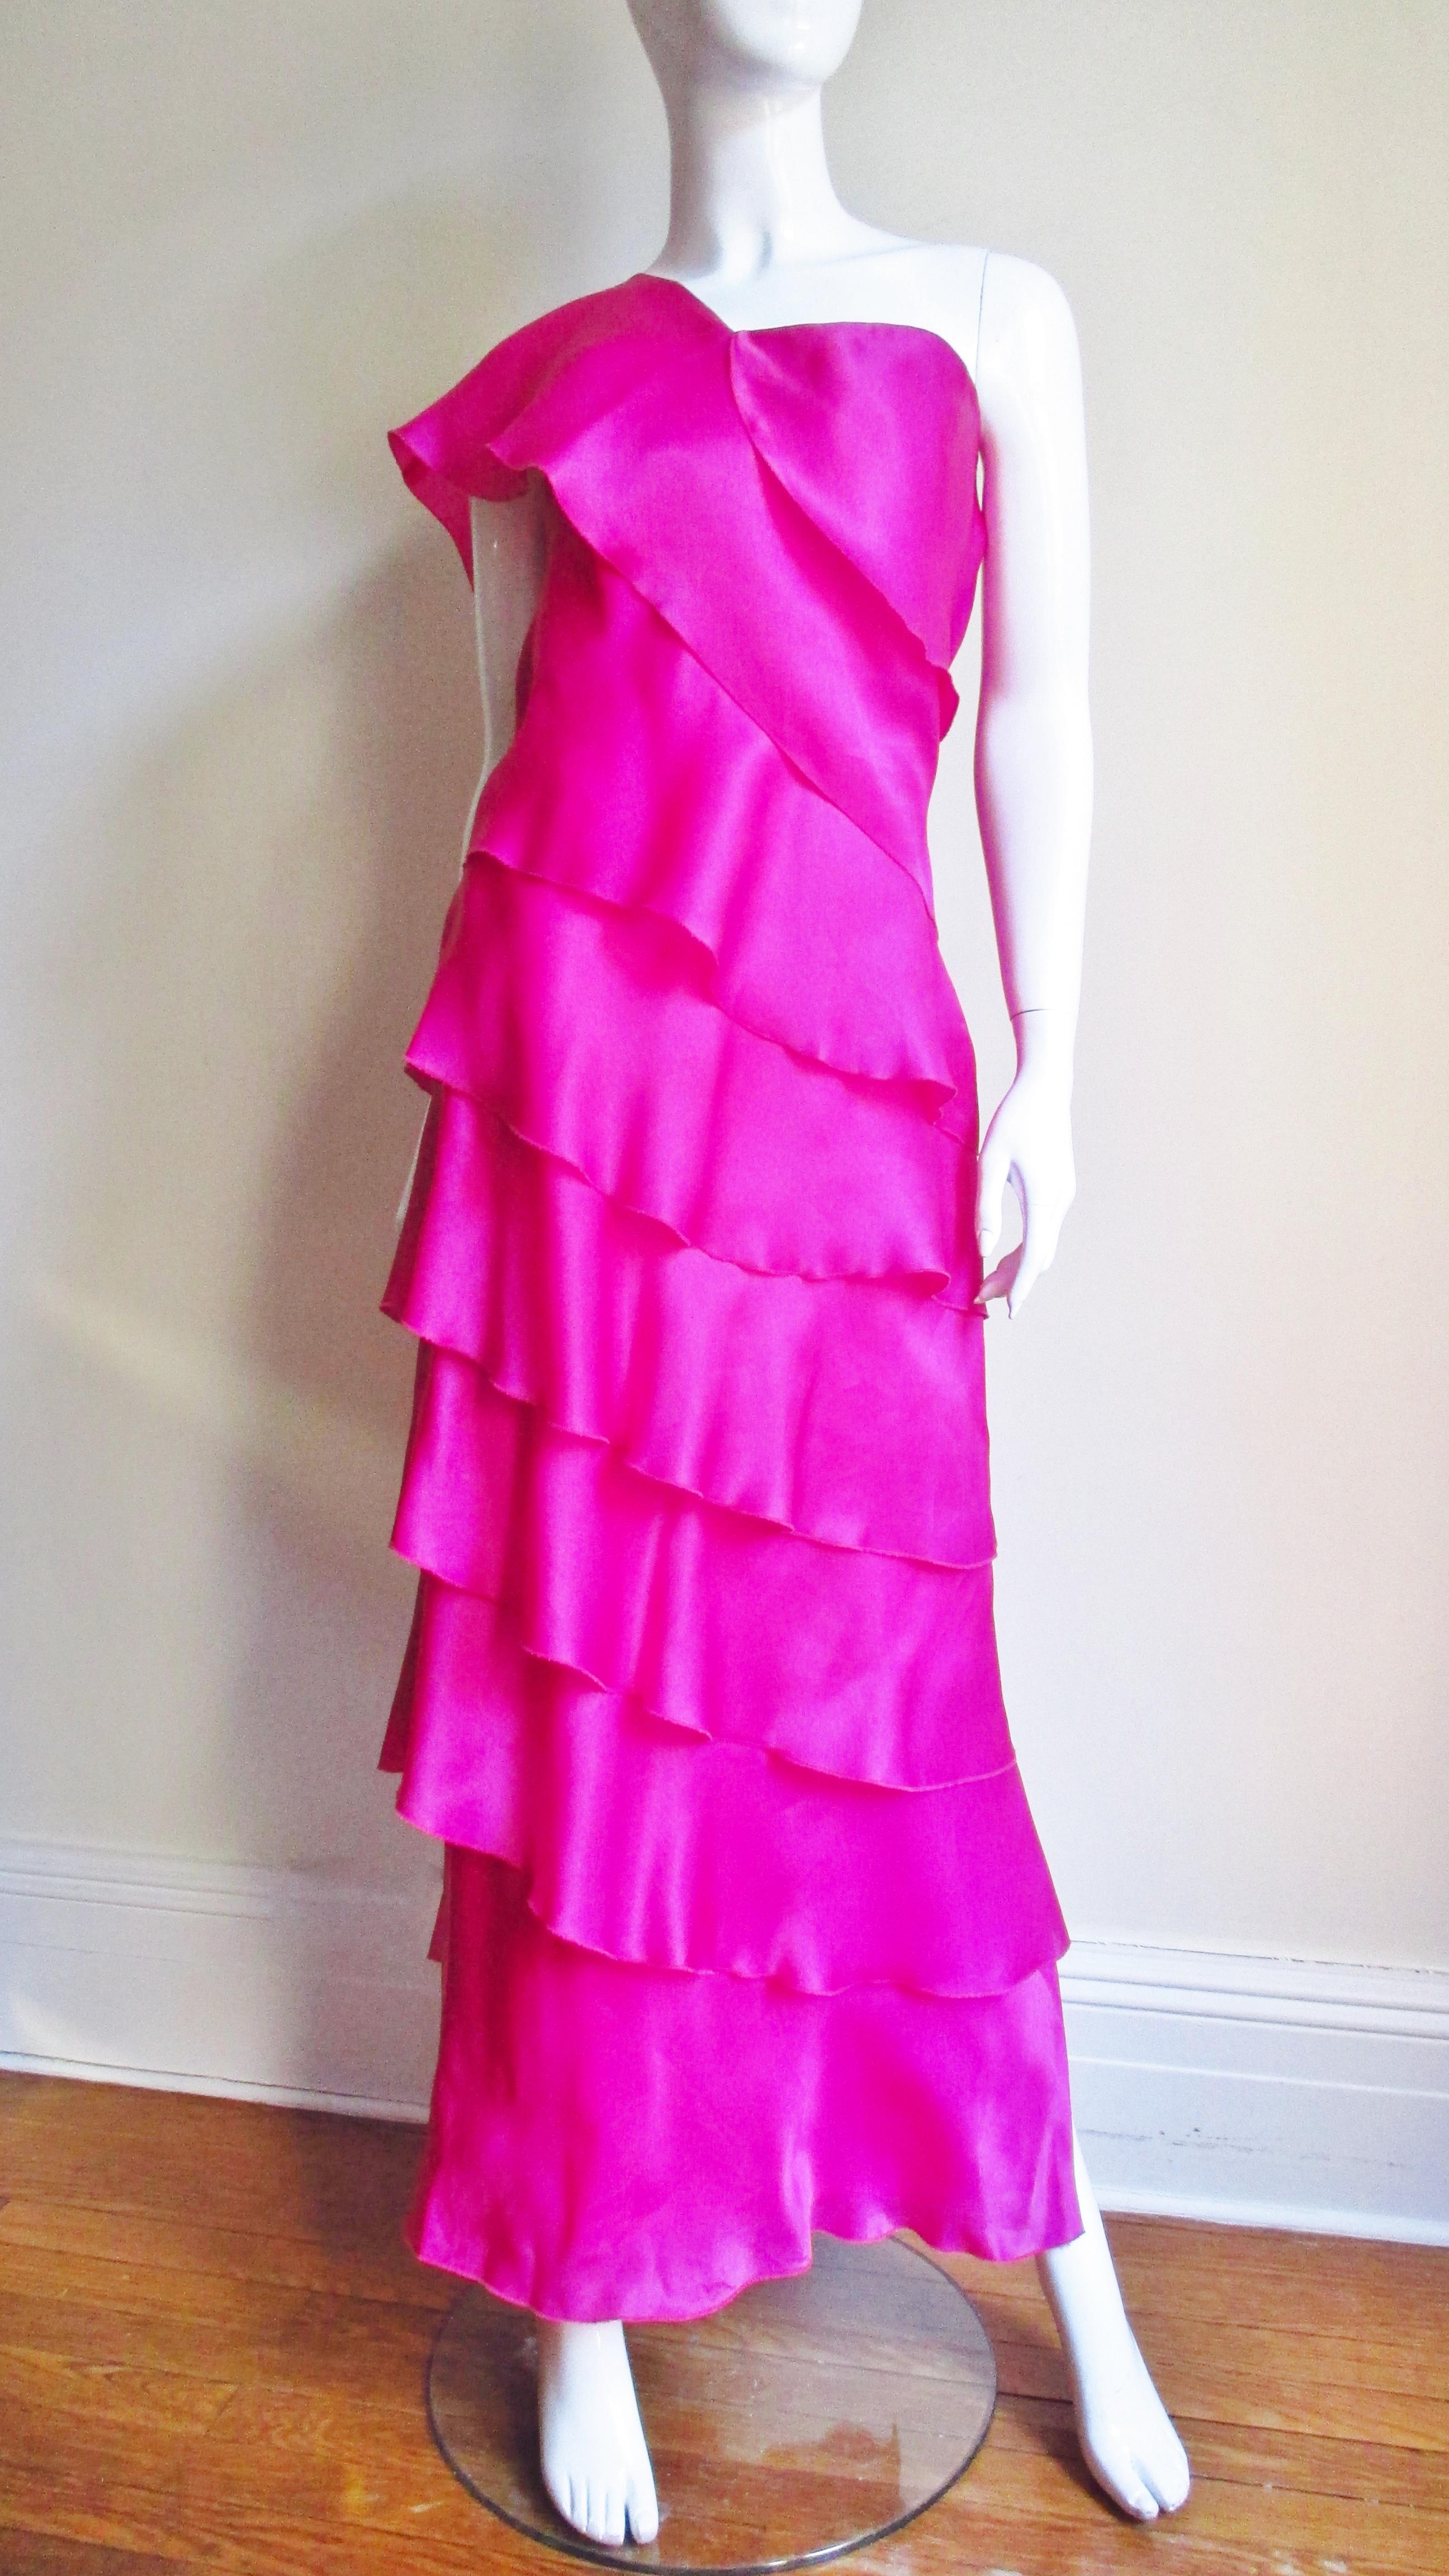 A gorgeous bright pink silk gazar gown by Jackie Rogers.  It has a one shoulder boned bodice with angled rows of silk wrapping around the dress to the hem.  It is lined in matching silk, has a side zipper, side slit and comes with a matchless